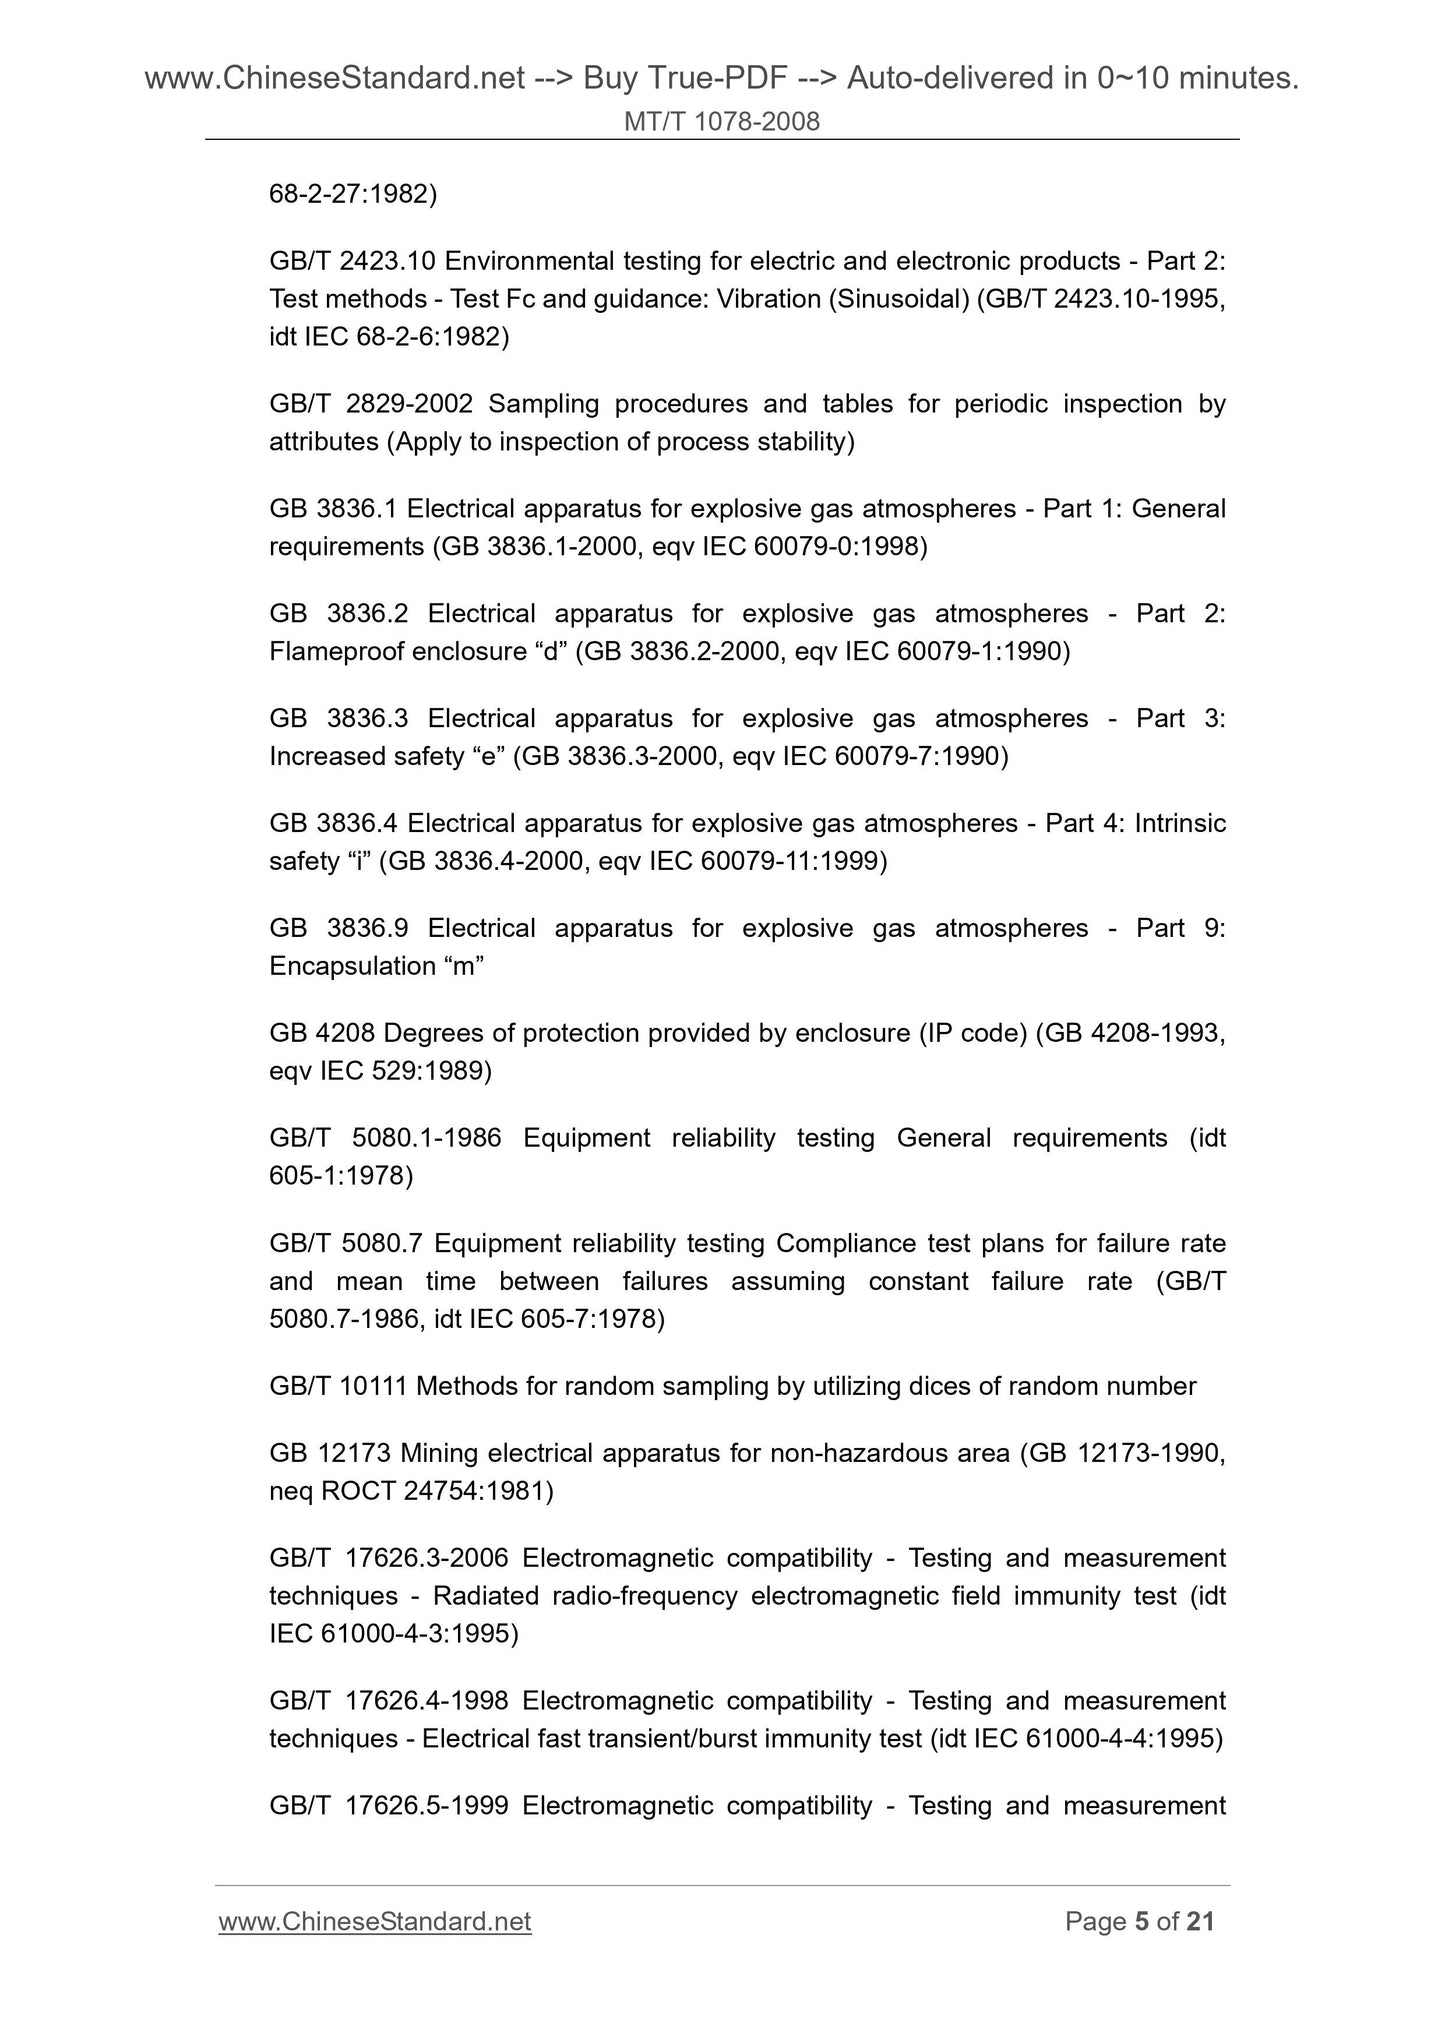 MT/T 1078-2008 Page 4